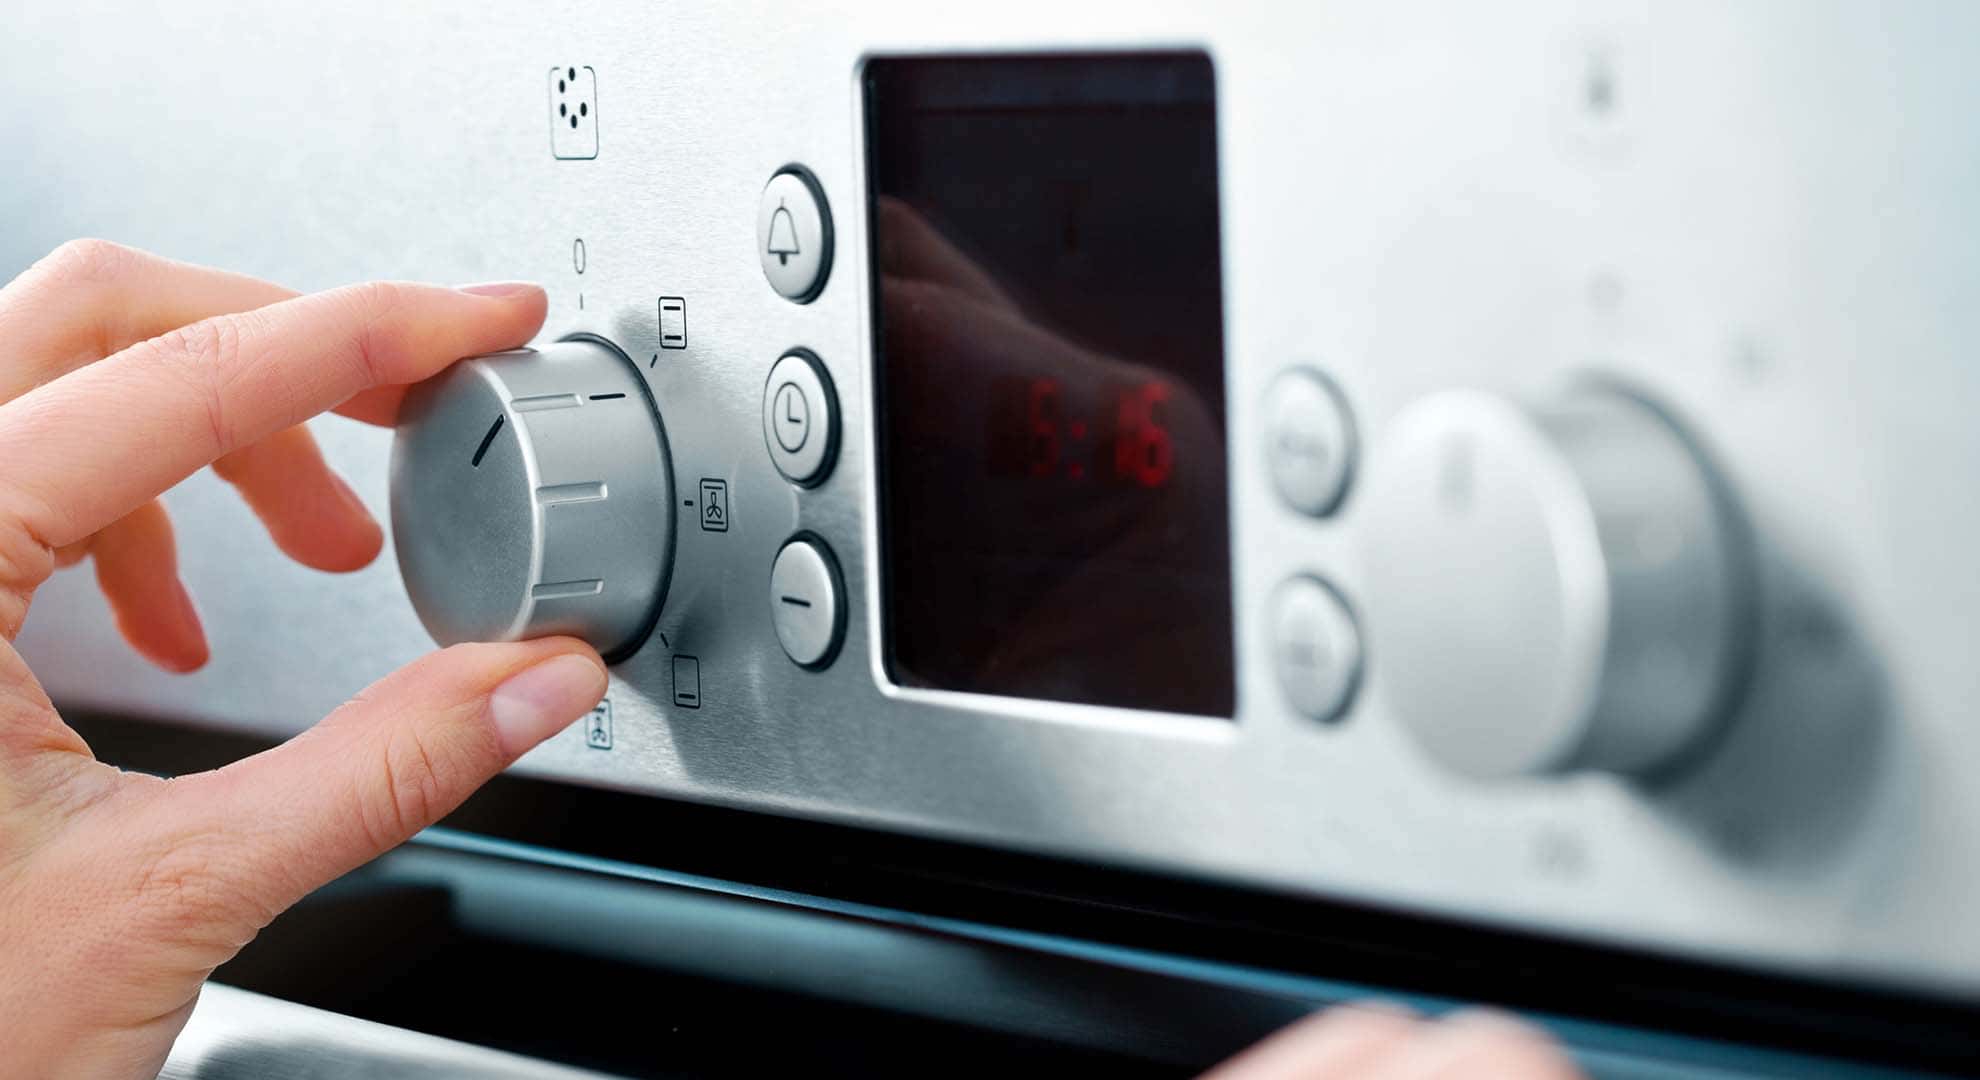 Photo of a person's hand turning the dial on an electric oven appliance